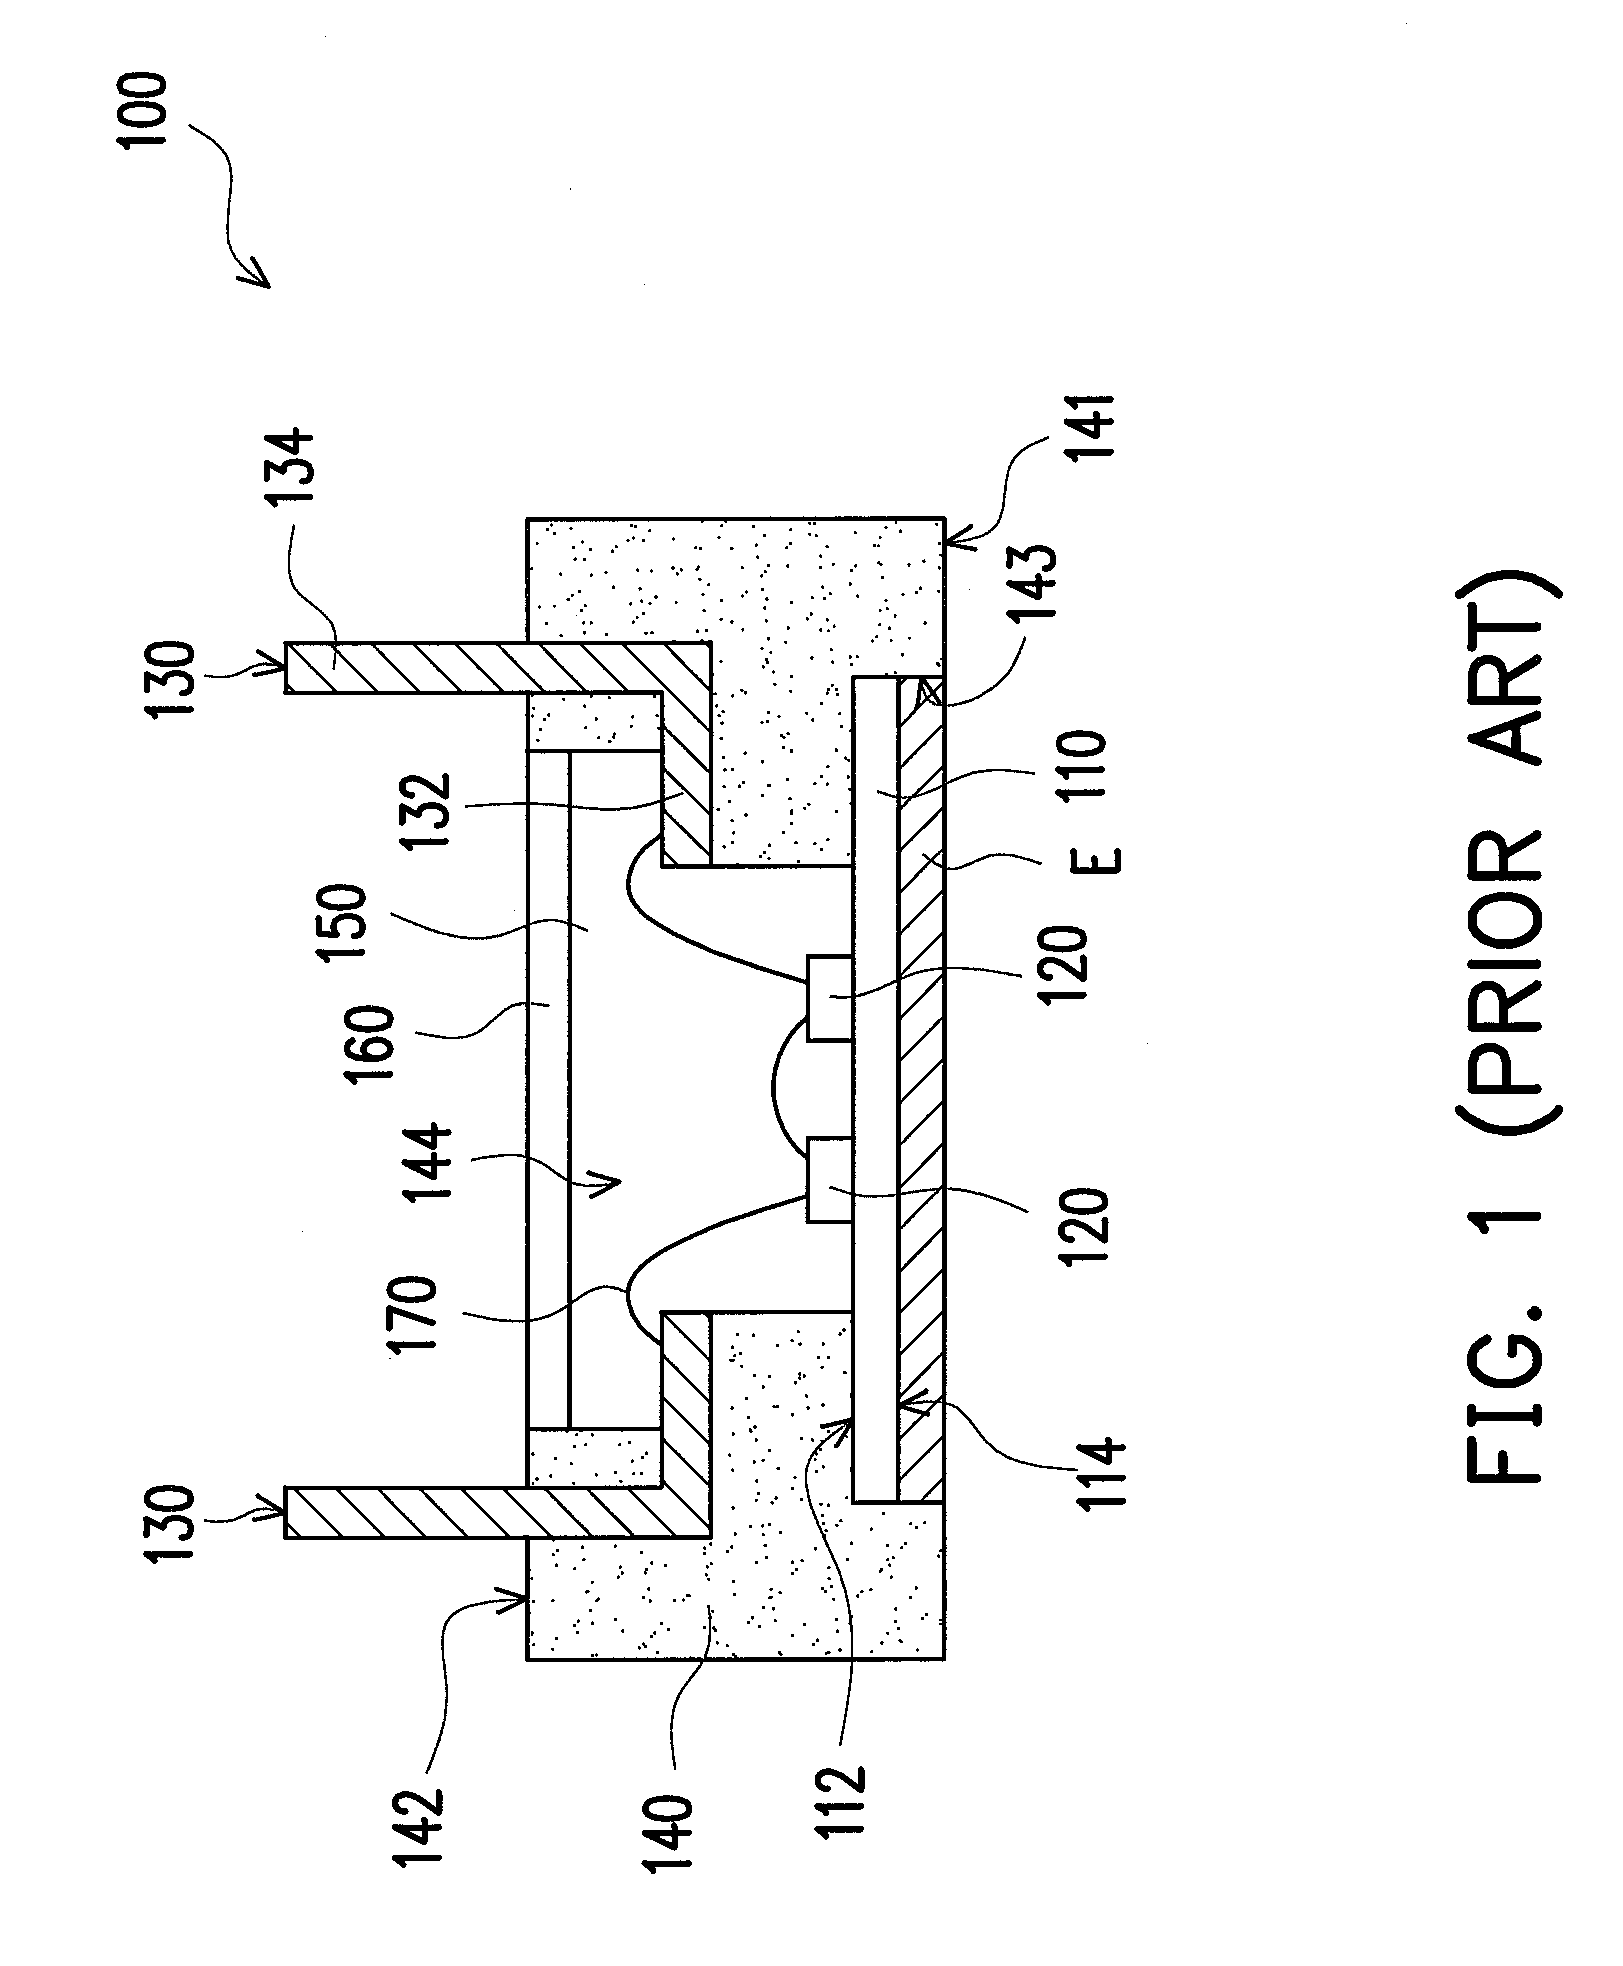 Chip package structure